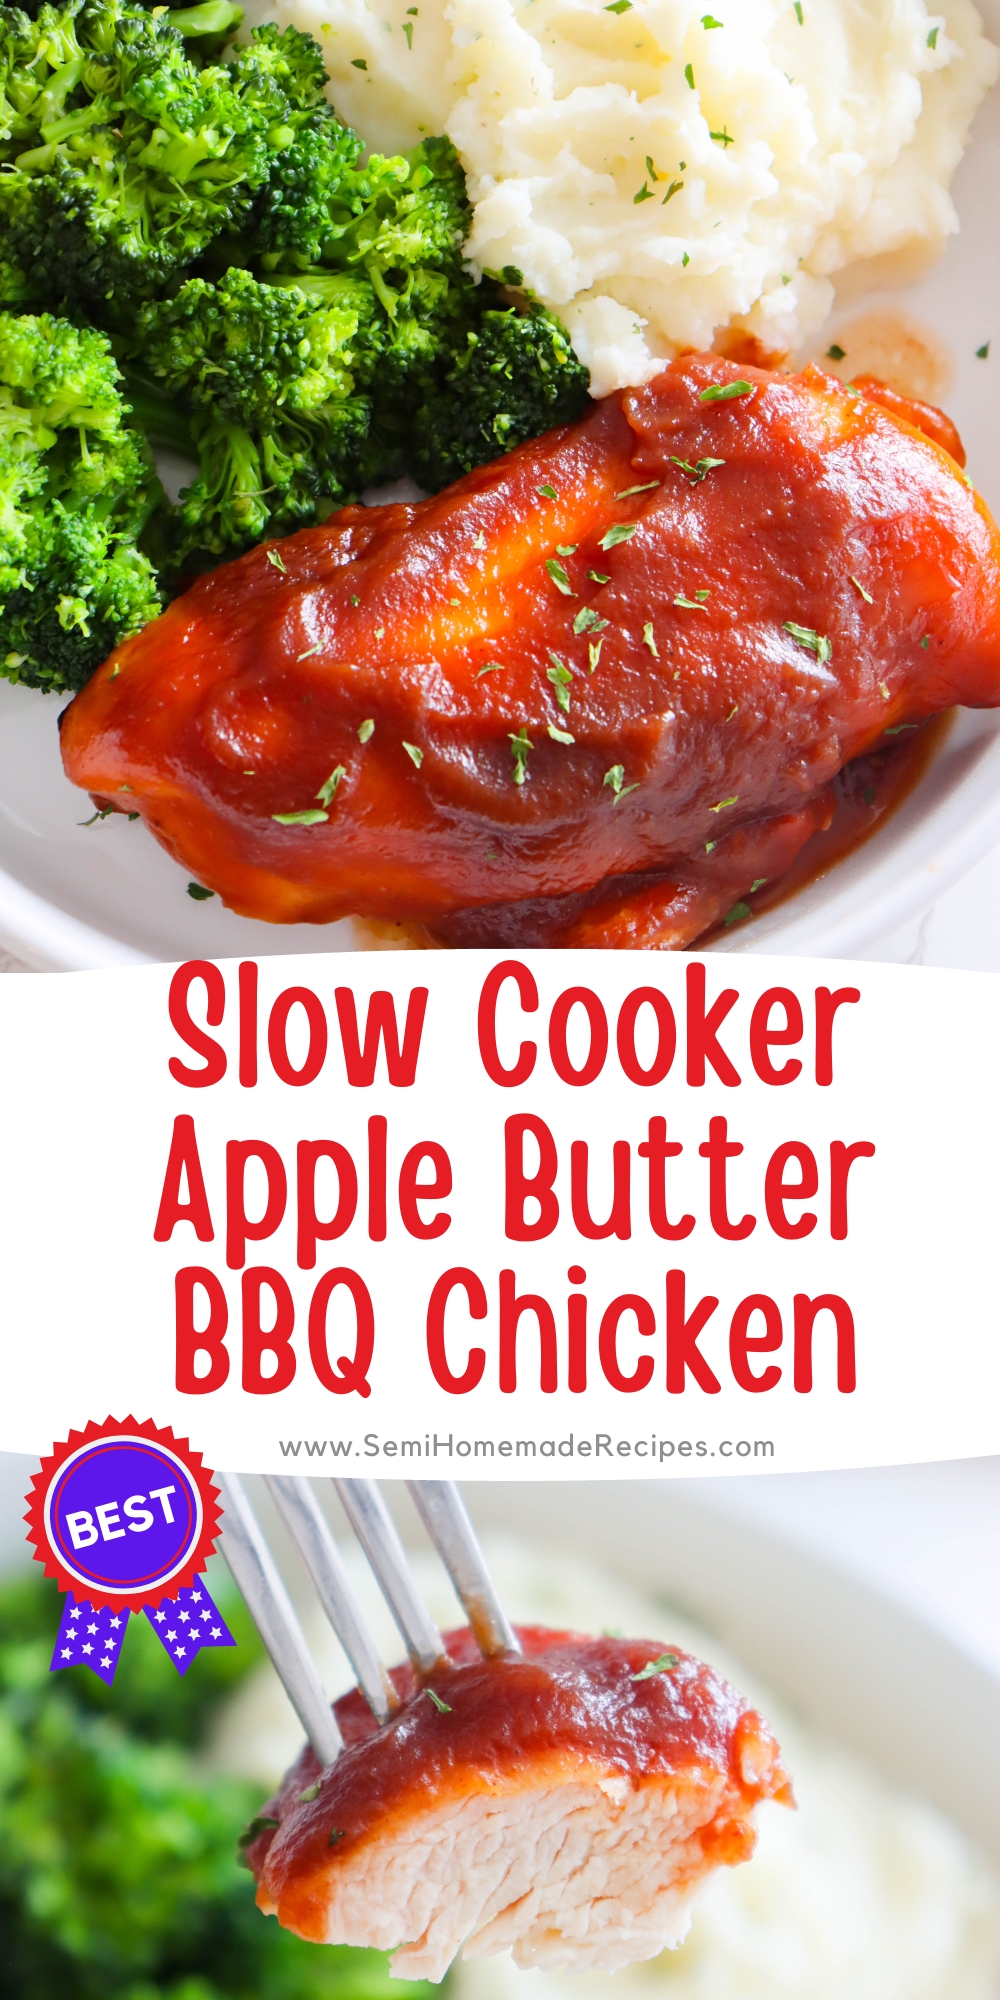 Feeling stressed or overwhelmed? Slow cooker apple butter chicken is the perfect comfort food. It's warm, cozy, and packed with flavor. Make a batch for yourself or share it with loved ones for a heartwarming meal that will soothe your soul.